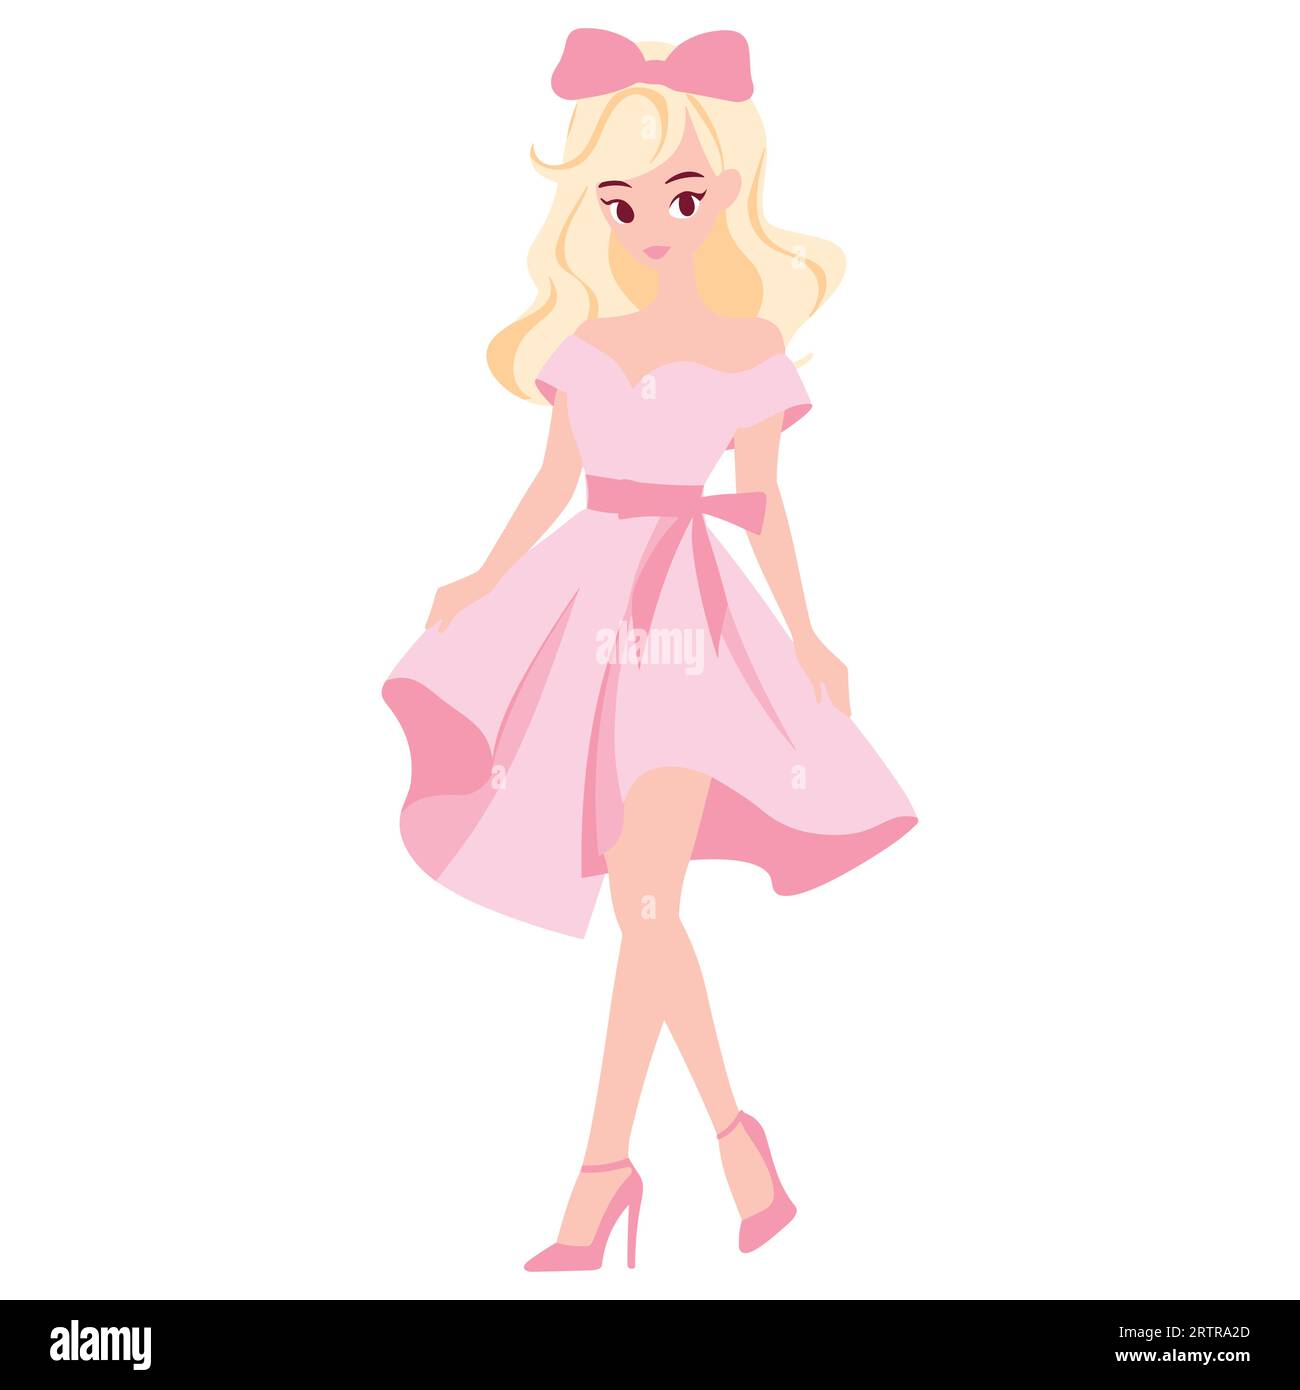 Pink Tilted Tiara And Number 24 Clip Art at  - vector